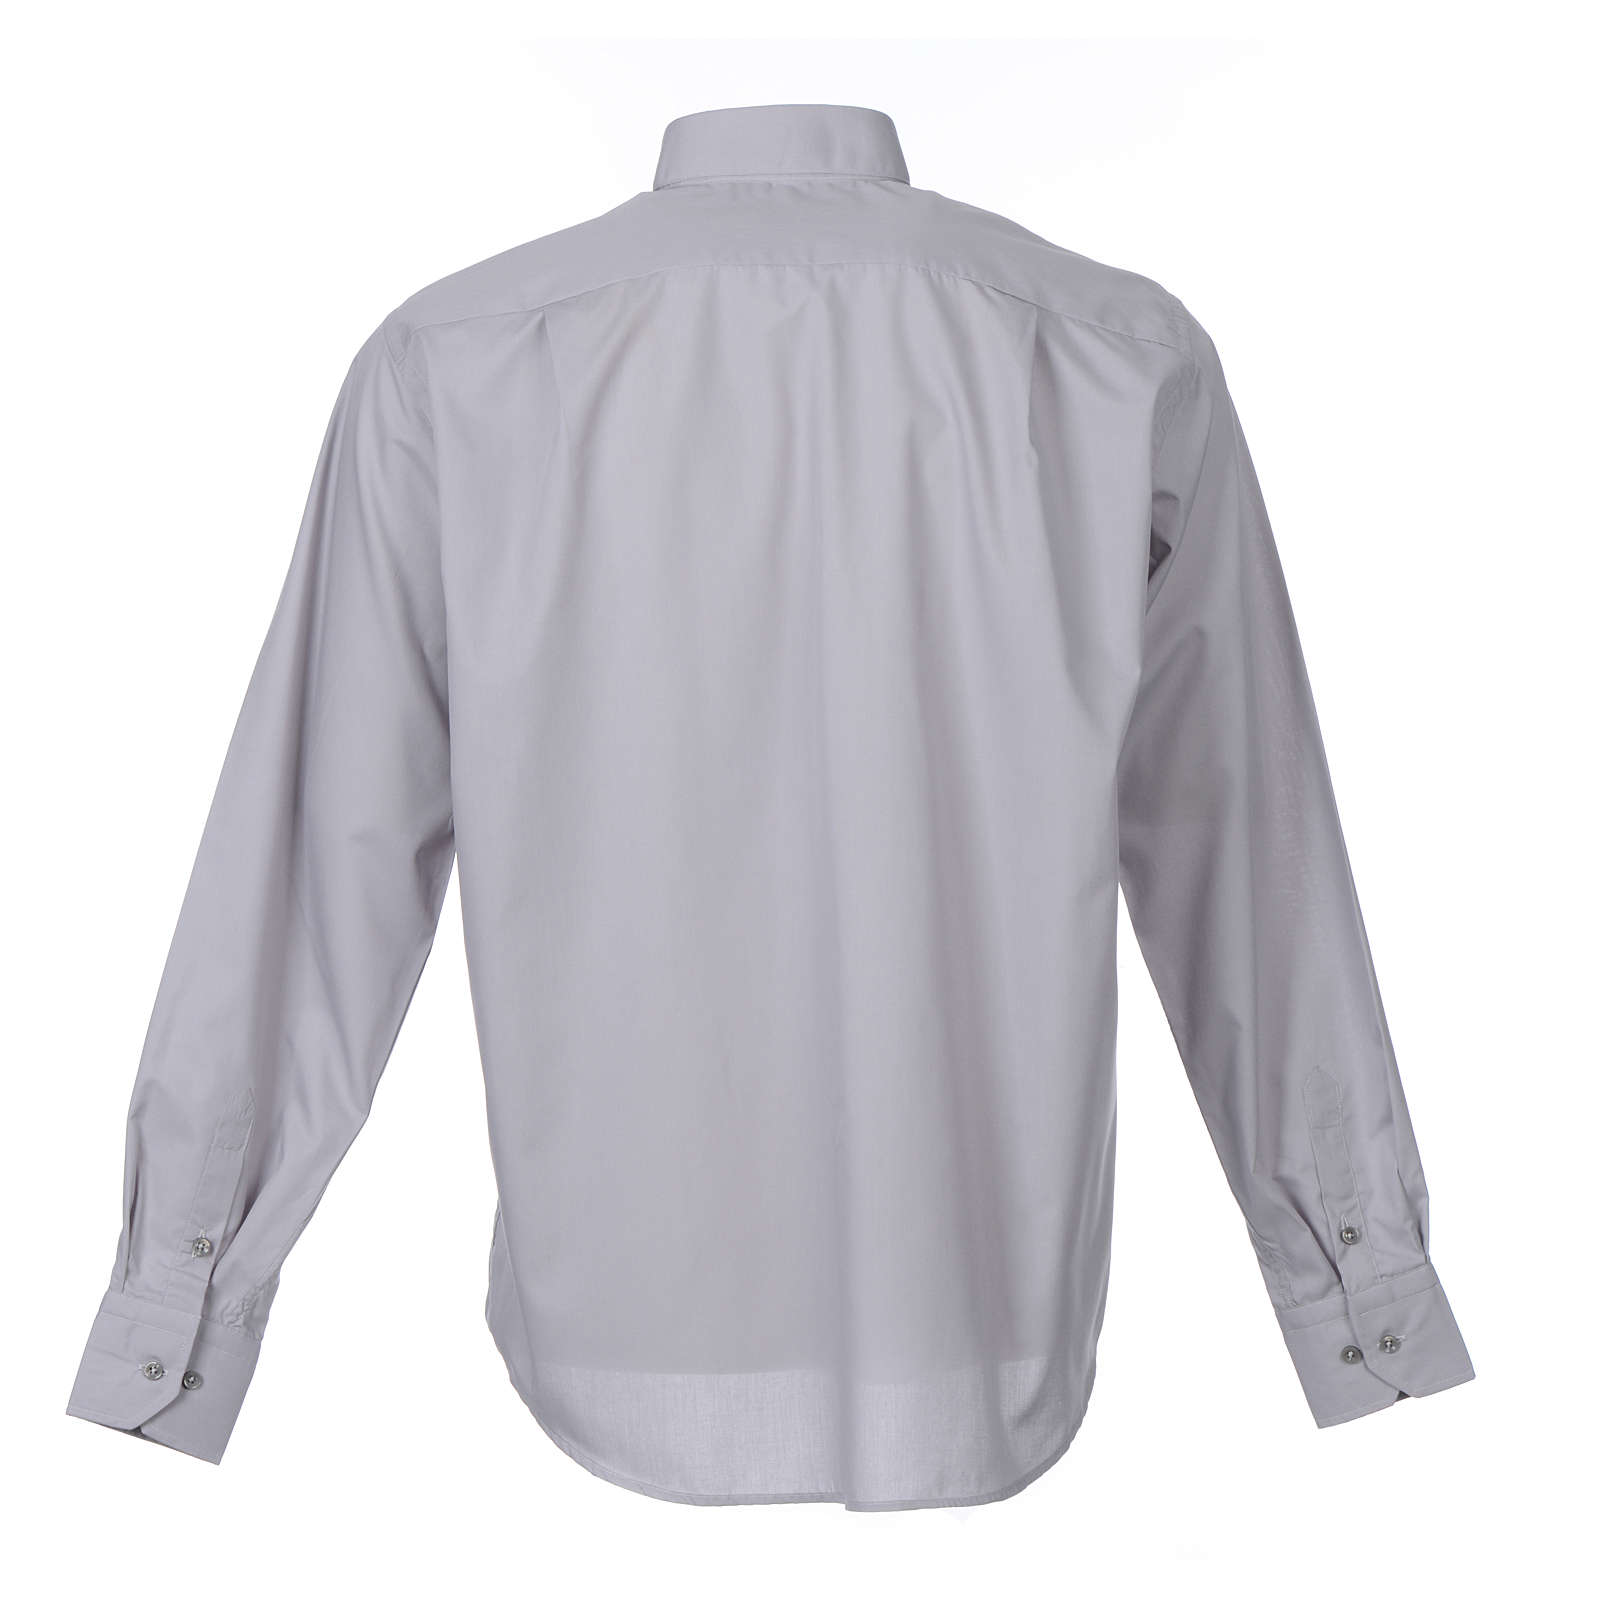 Tab Collar Light Grey Shirt long sleeve solid color mixed | online ...